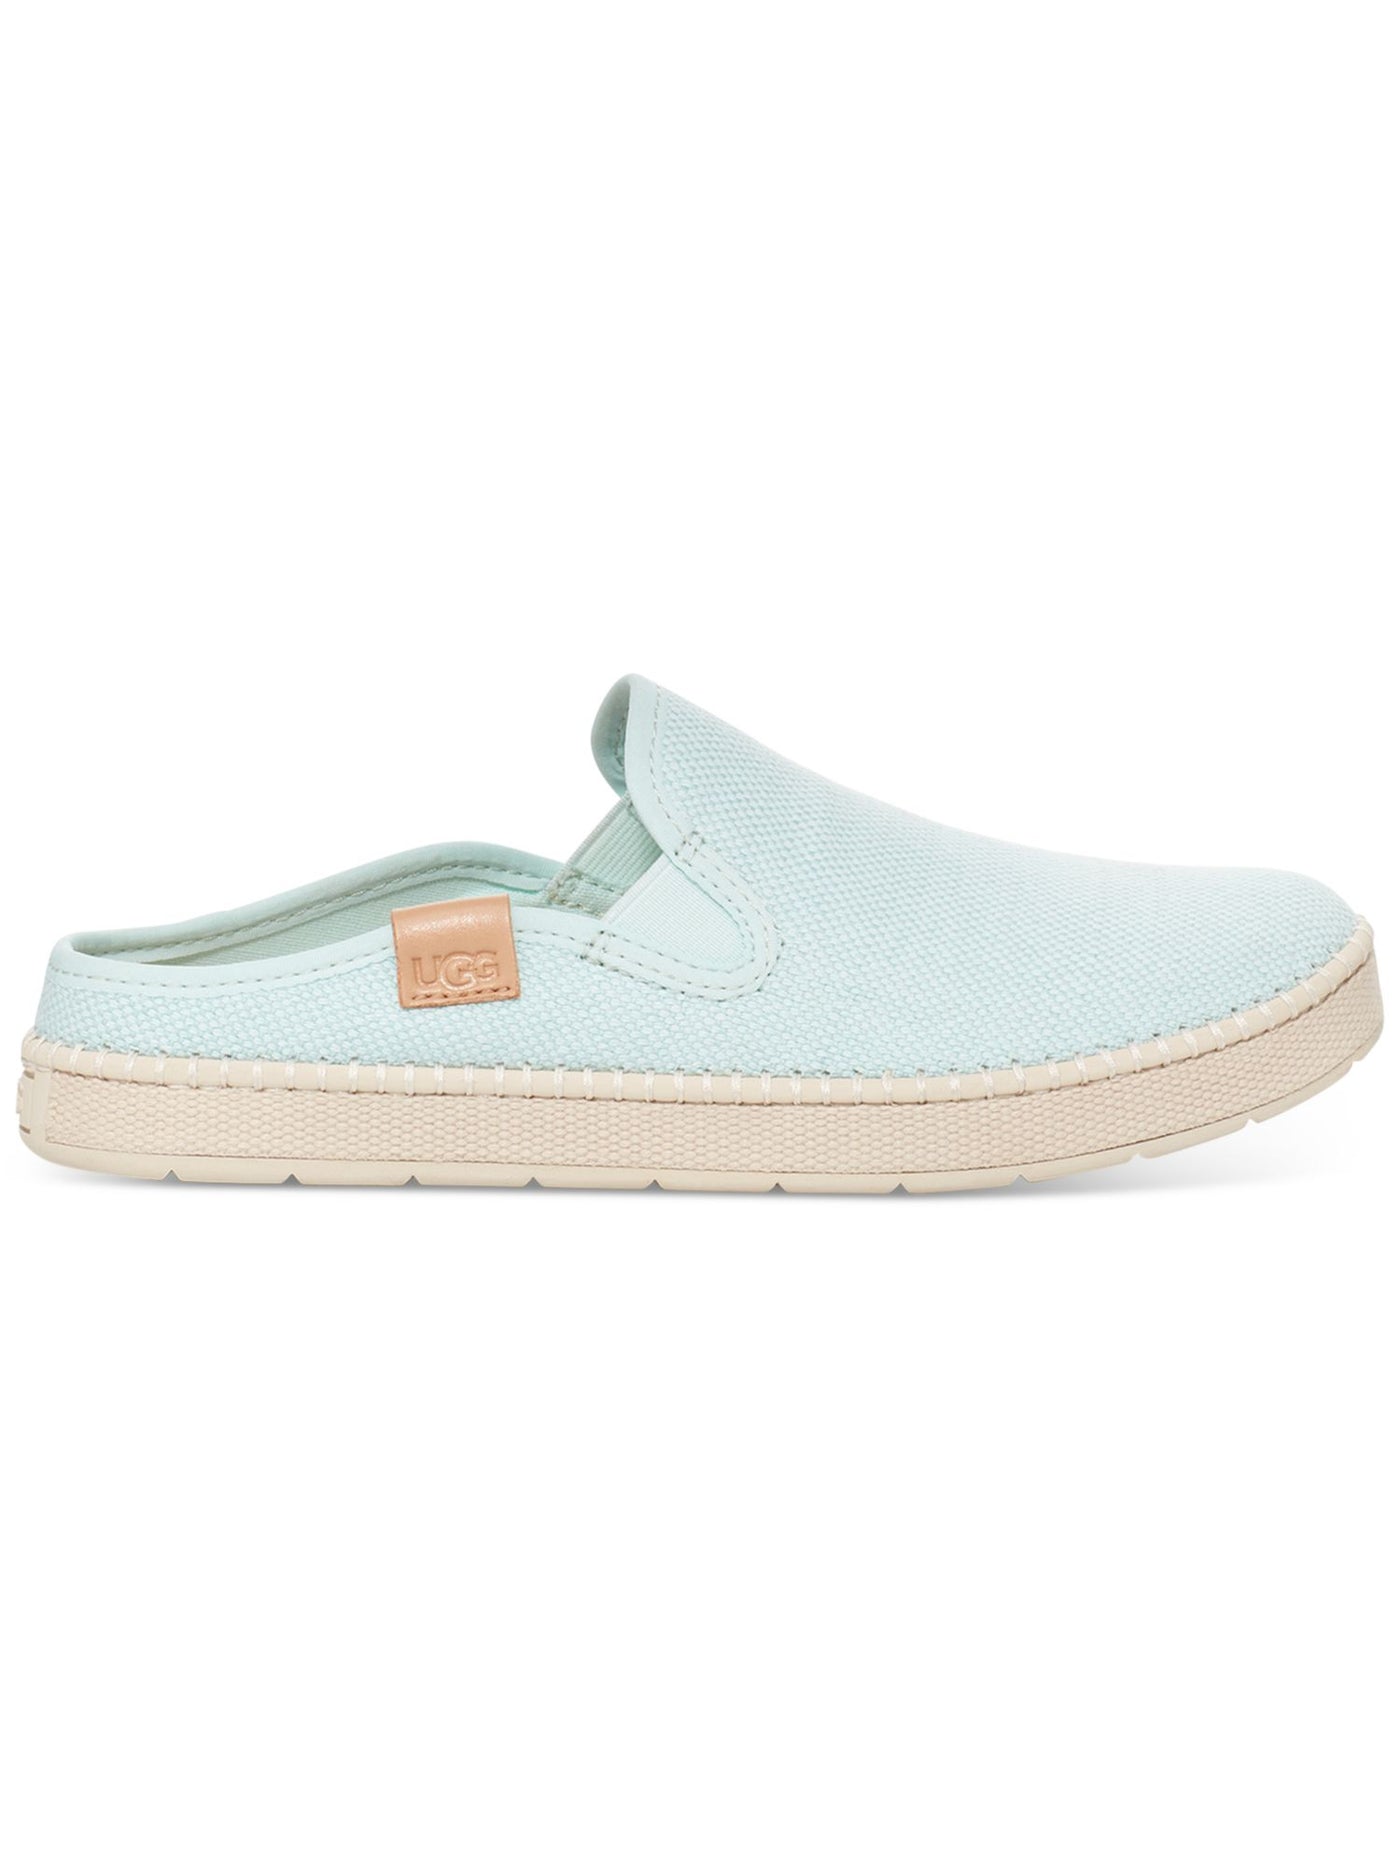 UGG Womens Light Blue Goring Removable Insole Cushioned Delu Round Toe Platform Slip On Mules 8.5